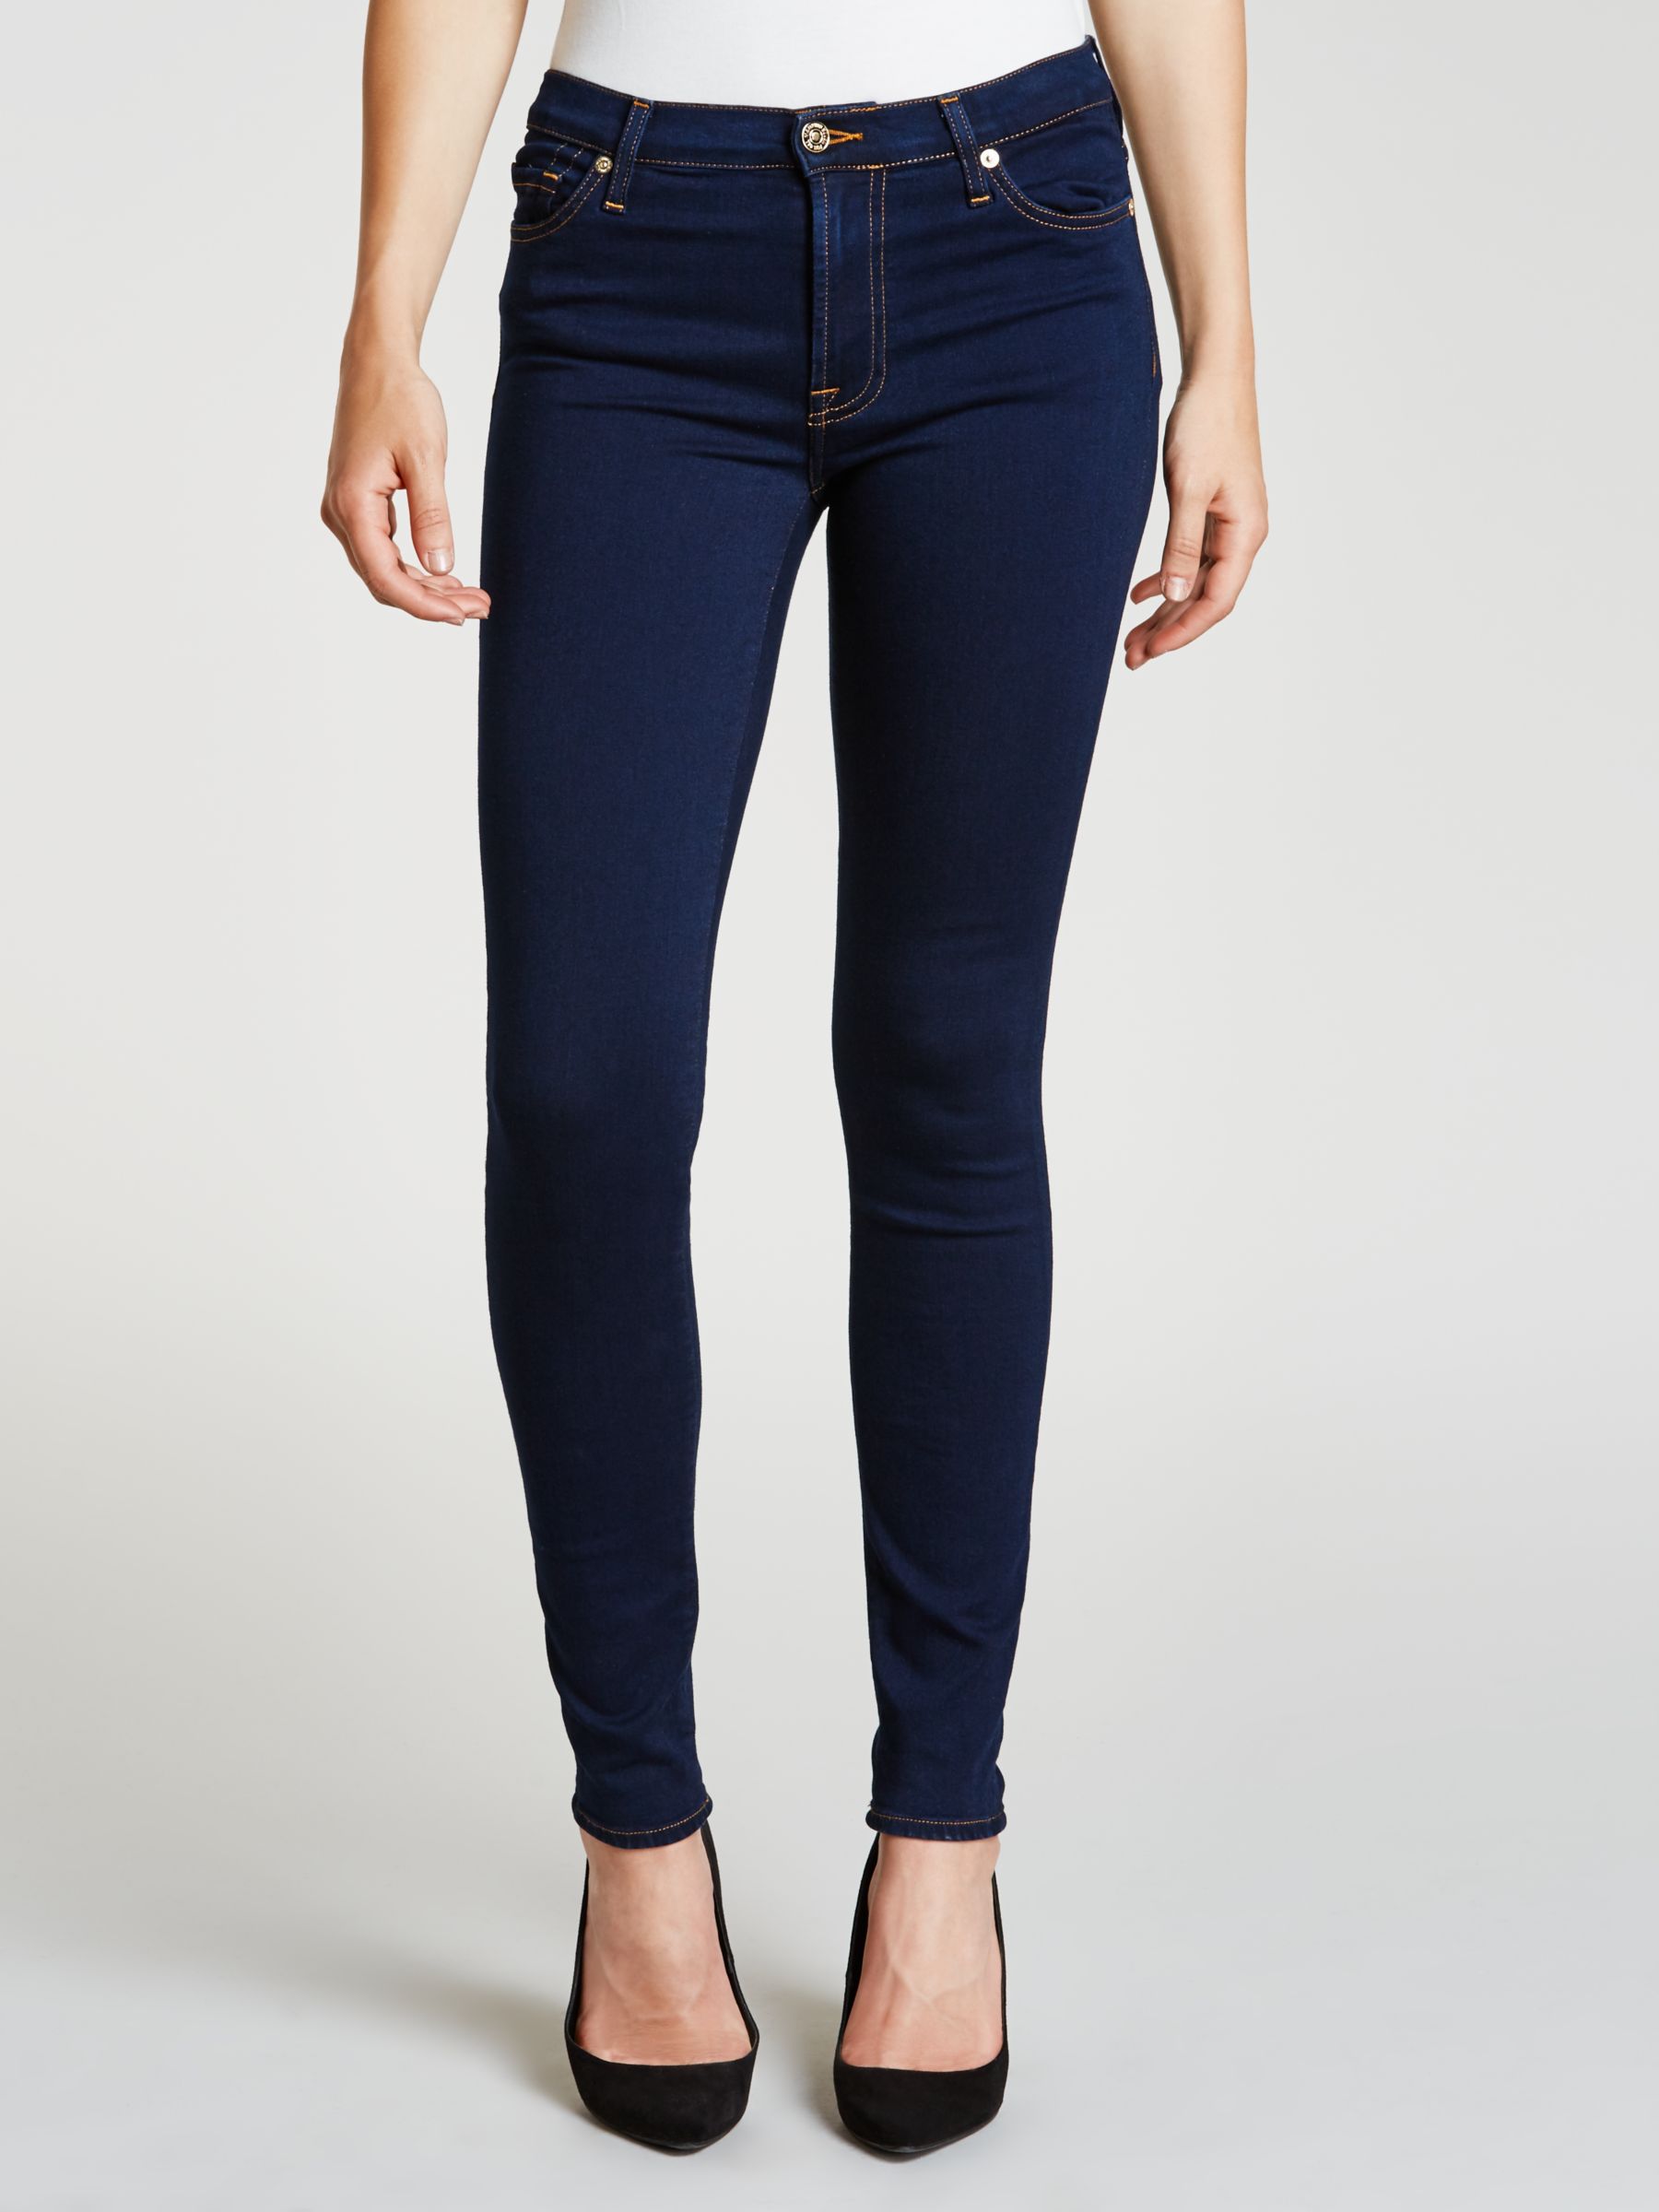 7 for all mankind slim illusion luxe skinny jeans